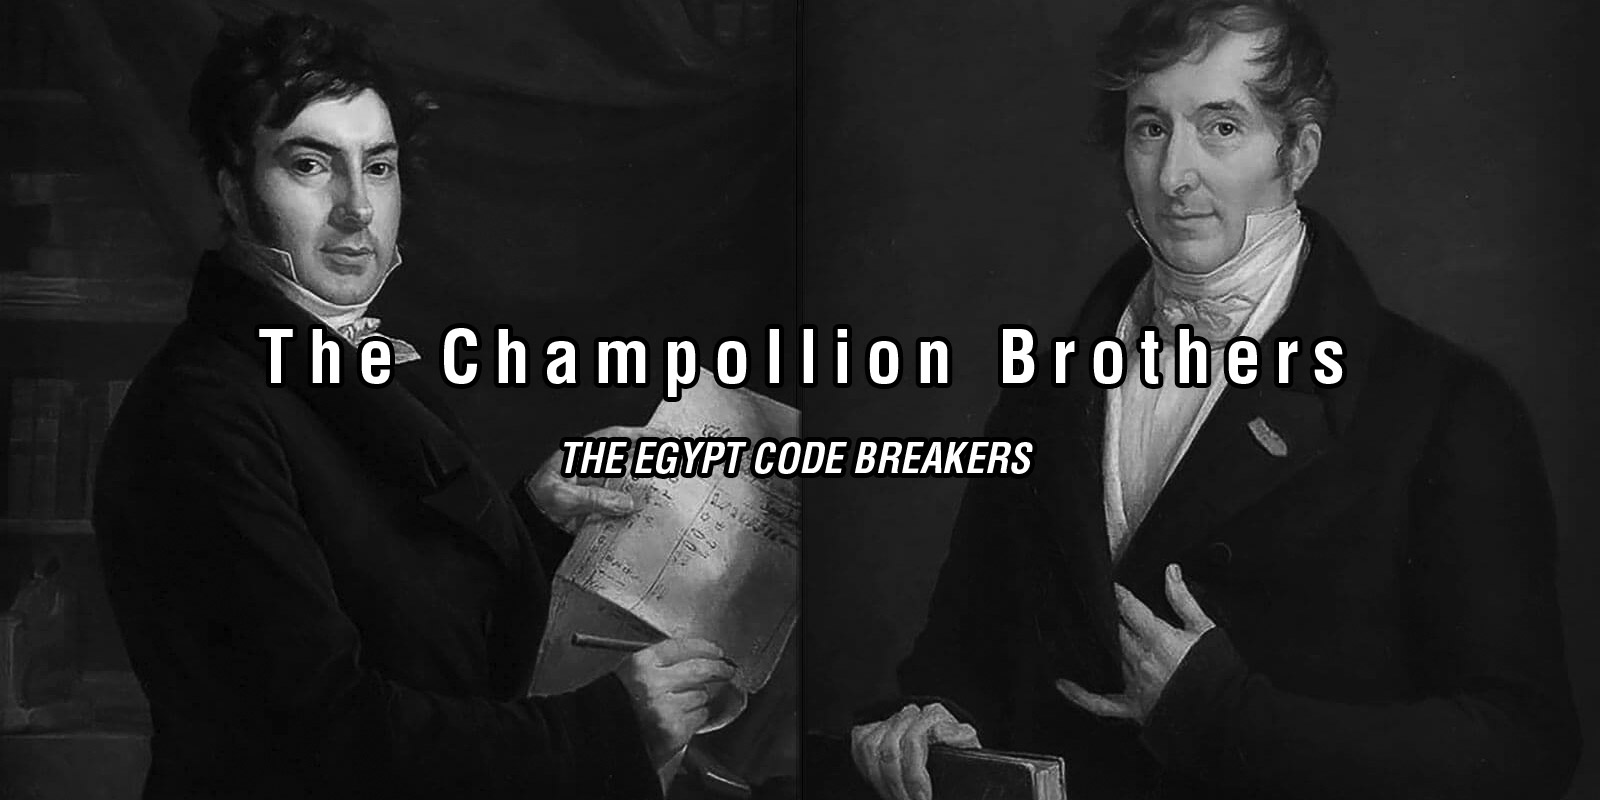 Arkhaios Film Festival 2023 - The Champollion Brothers: The Egypt Code Breakers